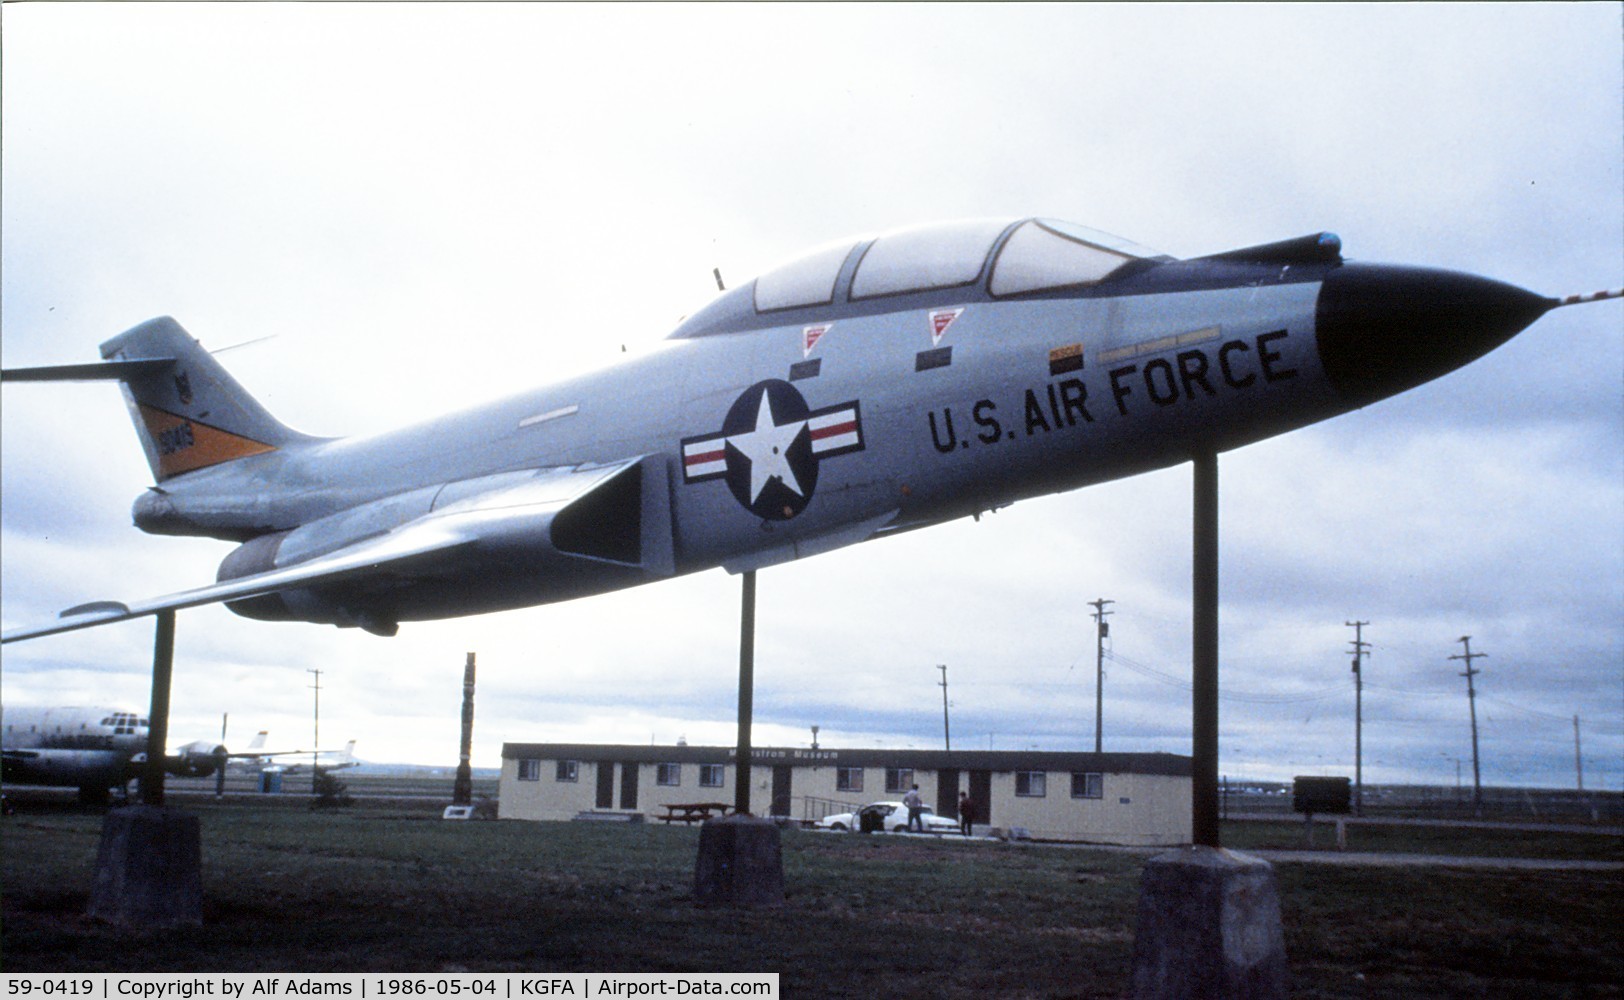 59-0419, 1959 McDonnell F-101F Voodoo C/N 743, Displayed at Malmstrom Air Force Base, Great Falls, Montana in 1986.